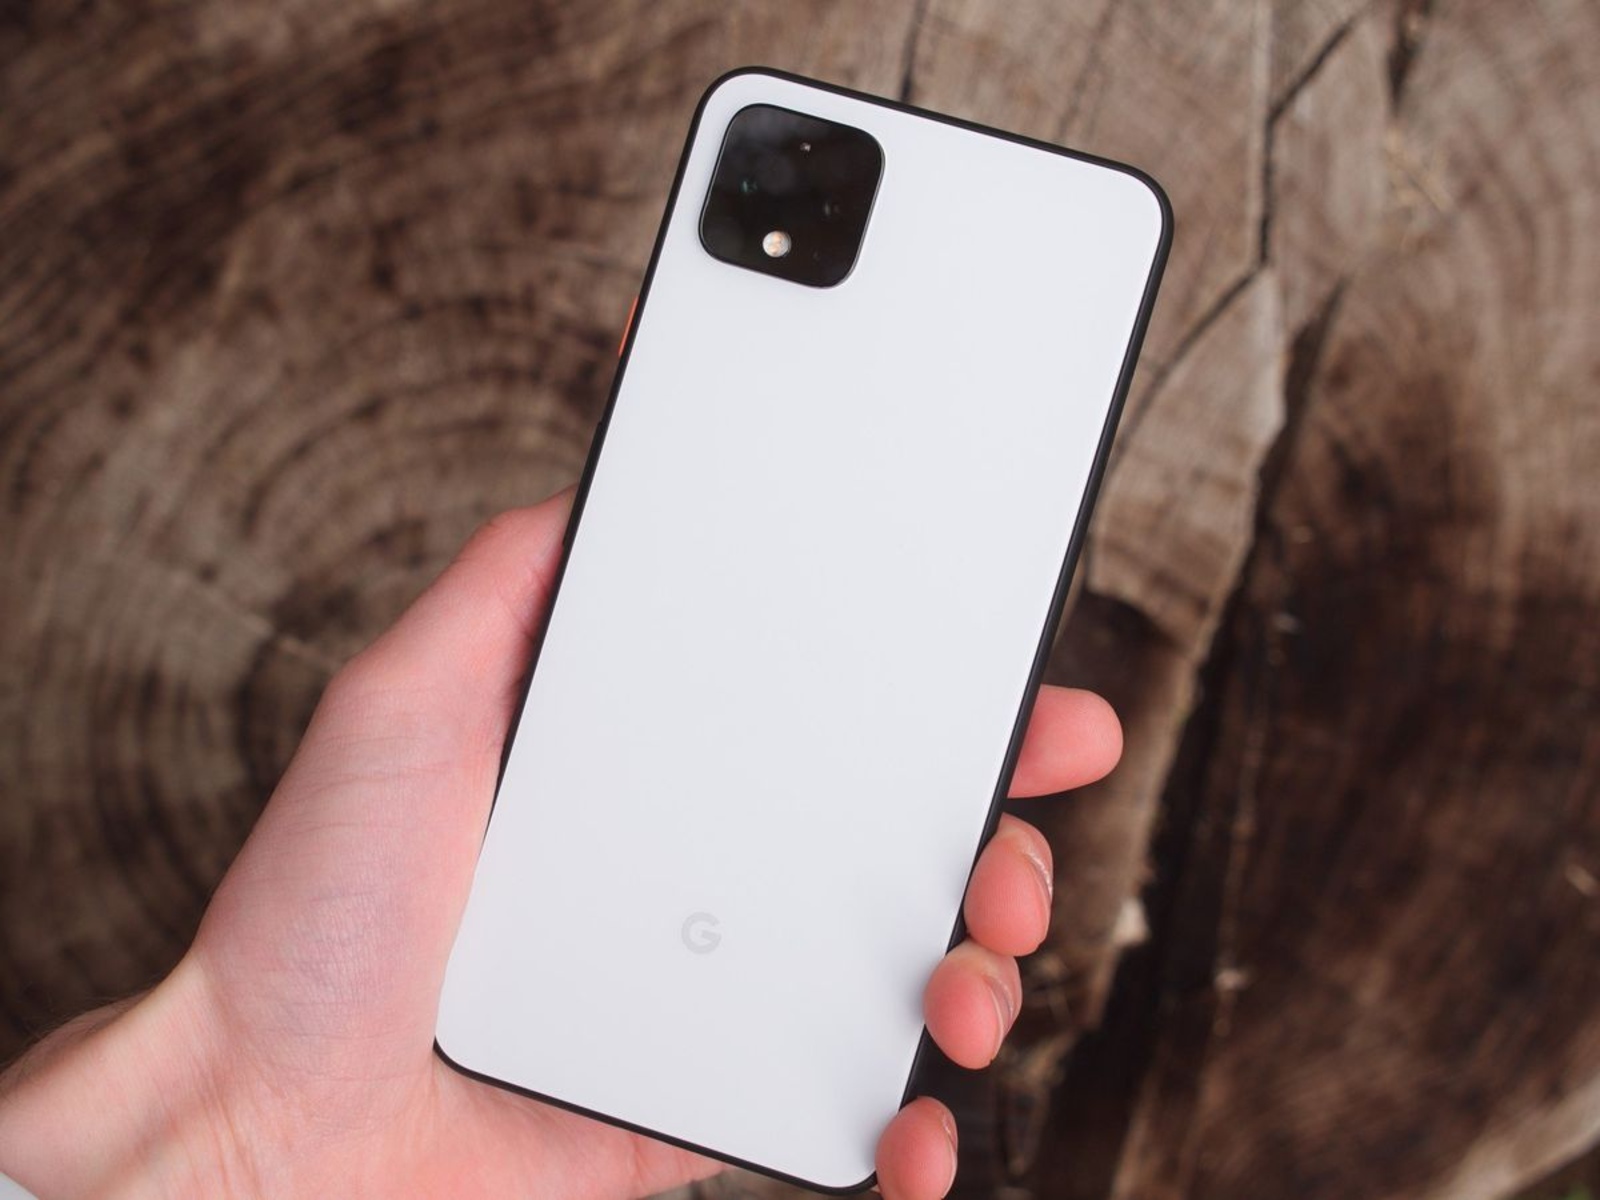 google-pixel-4-battery-life-what-to-expect